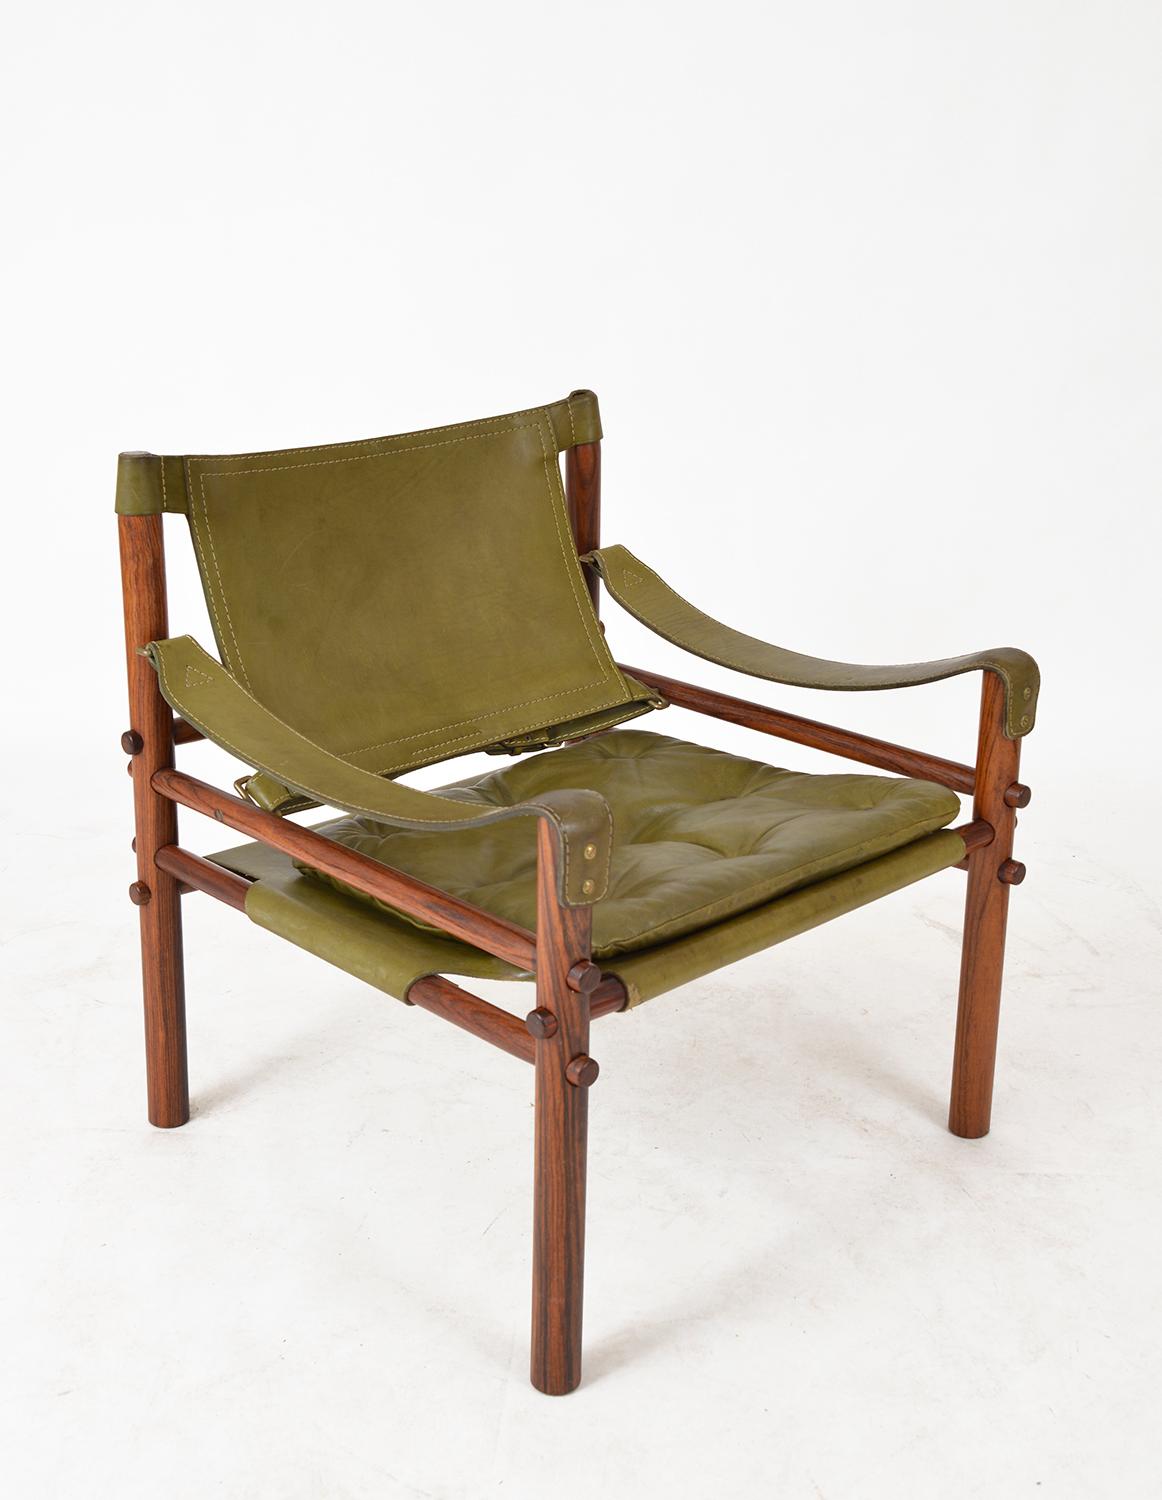 A beautiful example of a 1960s Arne Norell “Sirocco” Safari chair in green leather and rosewood – in my opinion the most stunning of combinations! 
This ingenious chair was designed in 1964 by Arne Norell to completely break down into its component